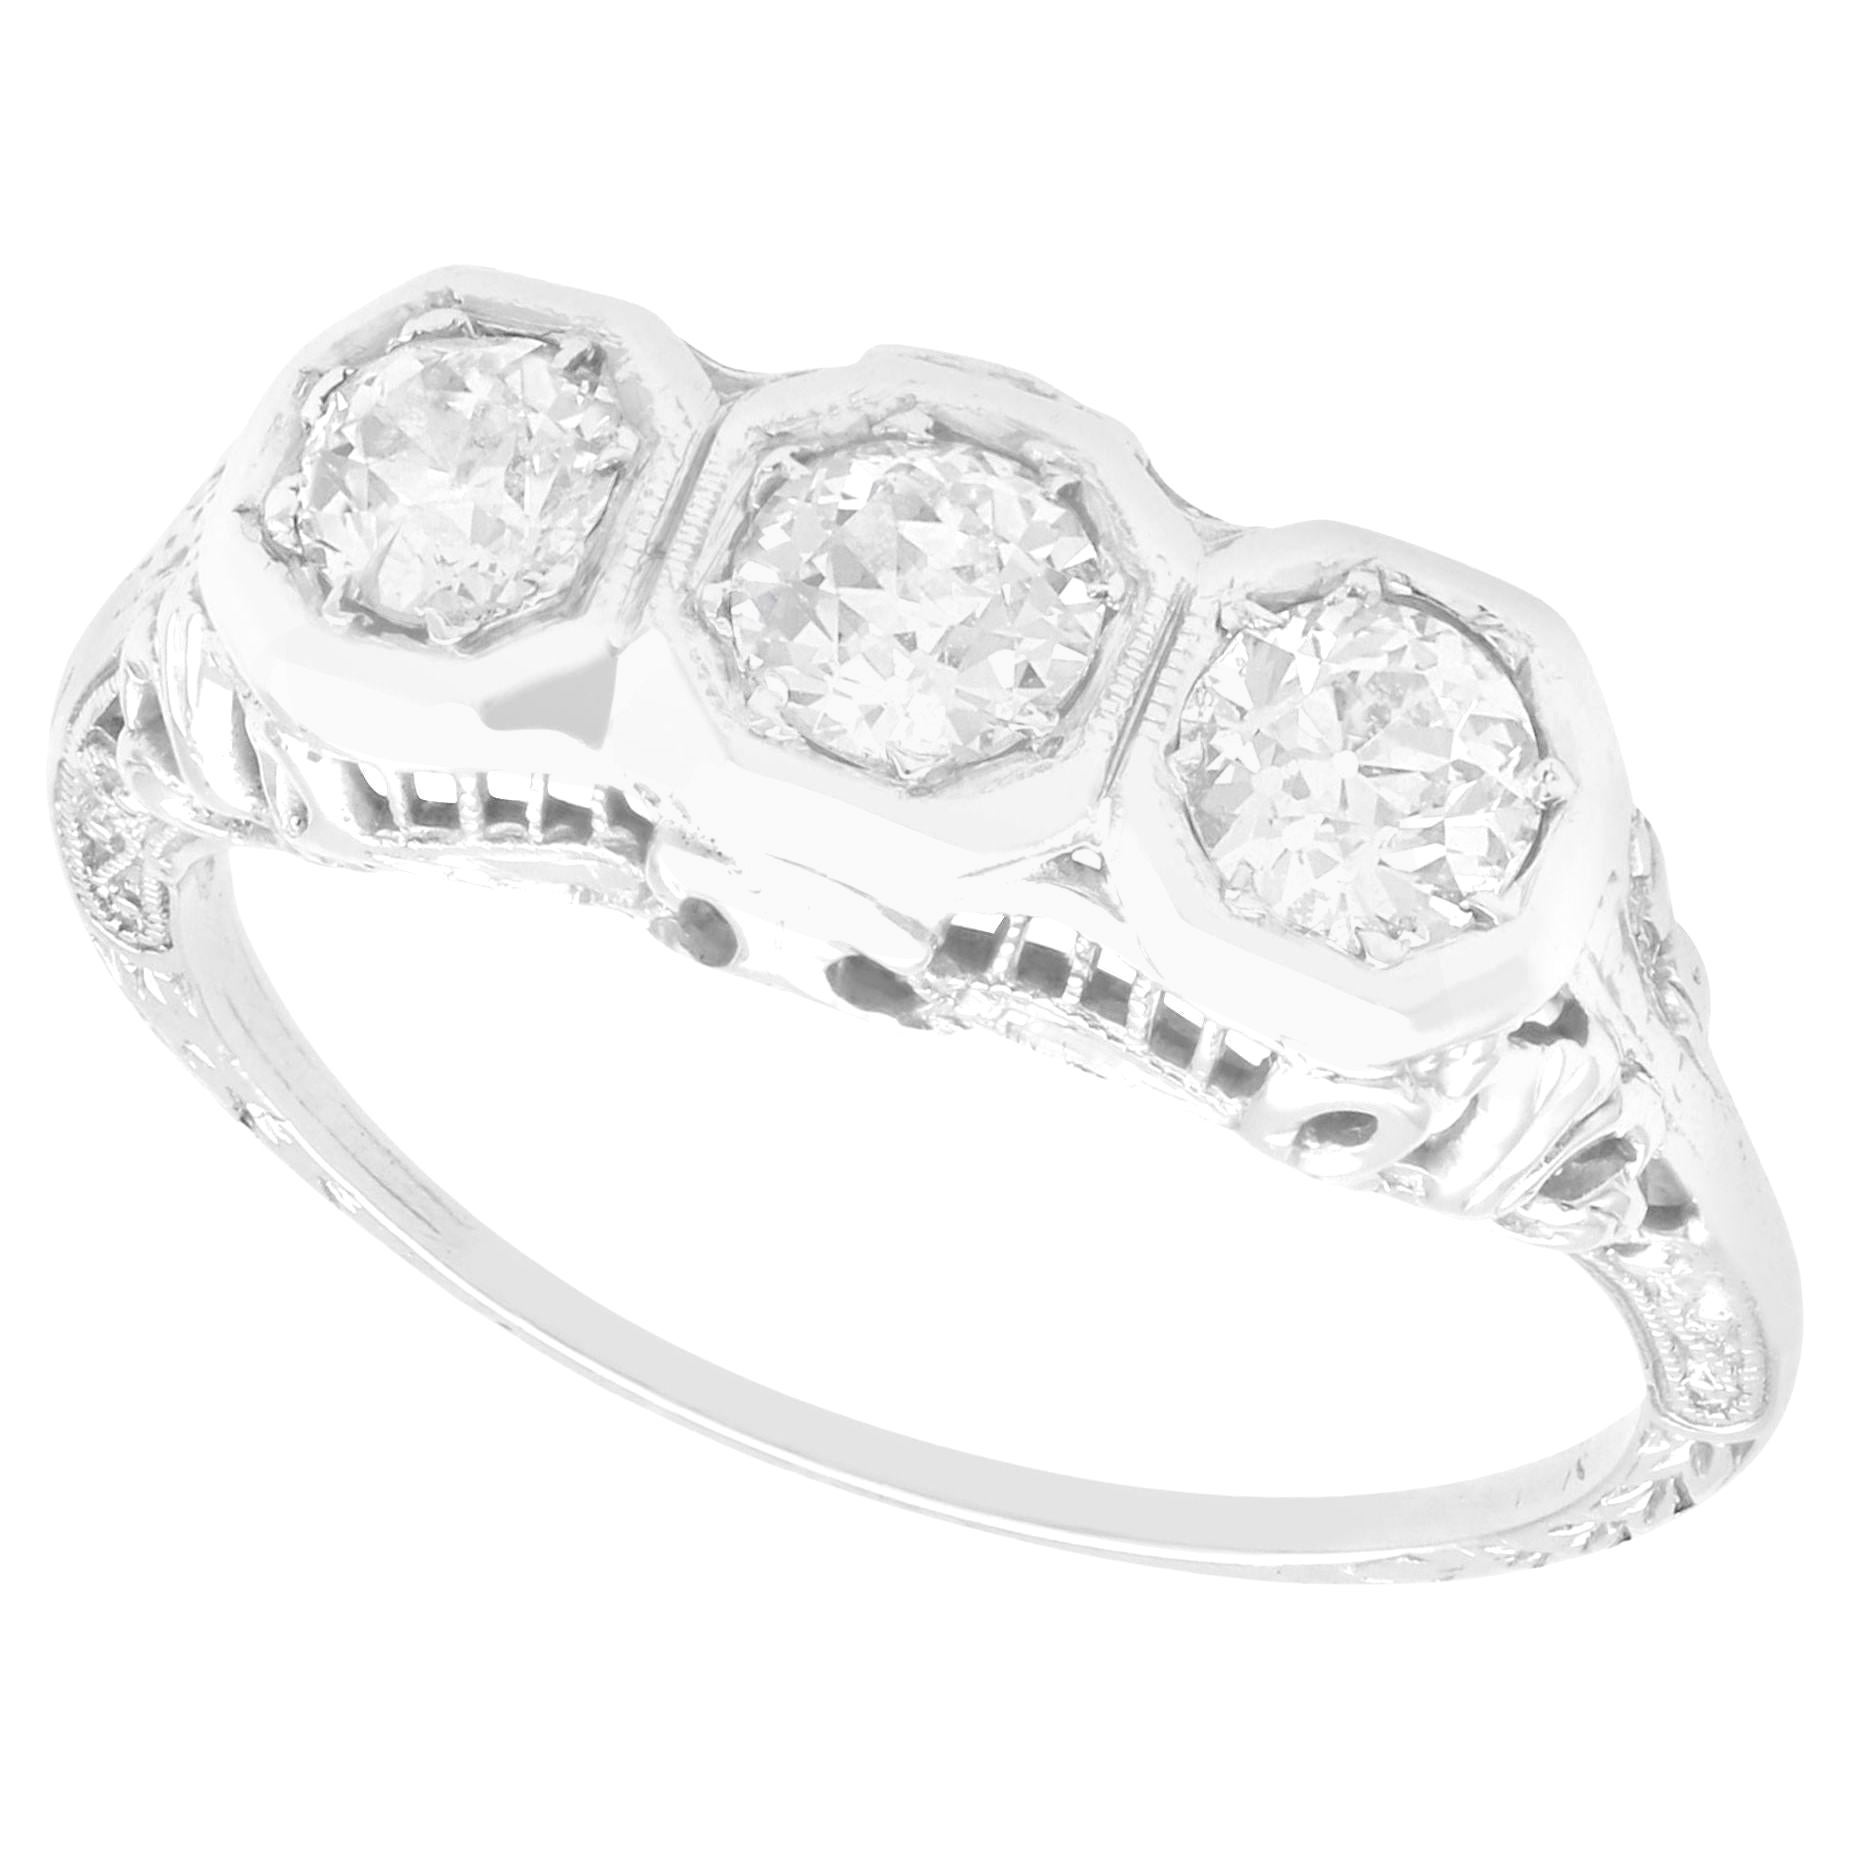 1920s antique 1.03 Carat Diamond and 18K White Gold Trilogy Ring For Sale